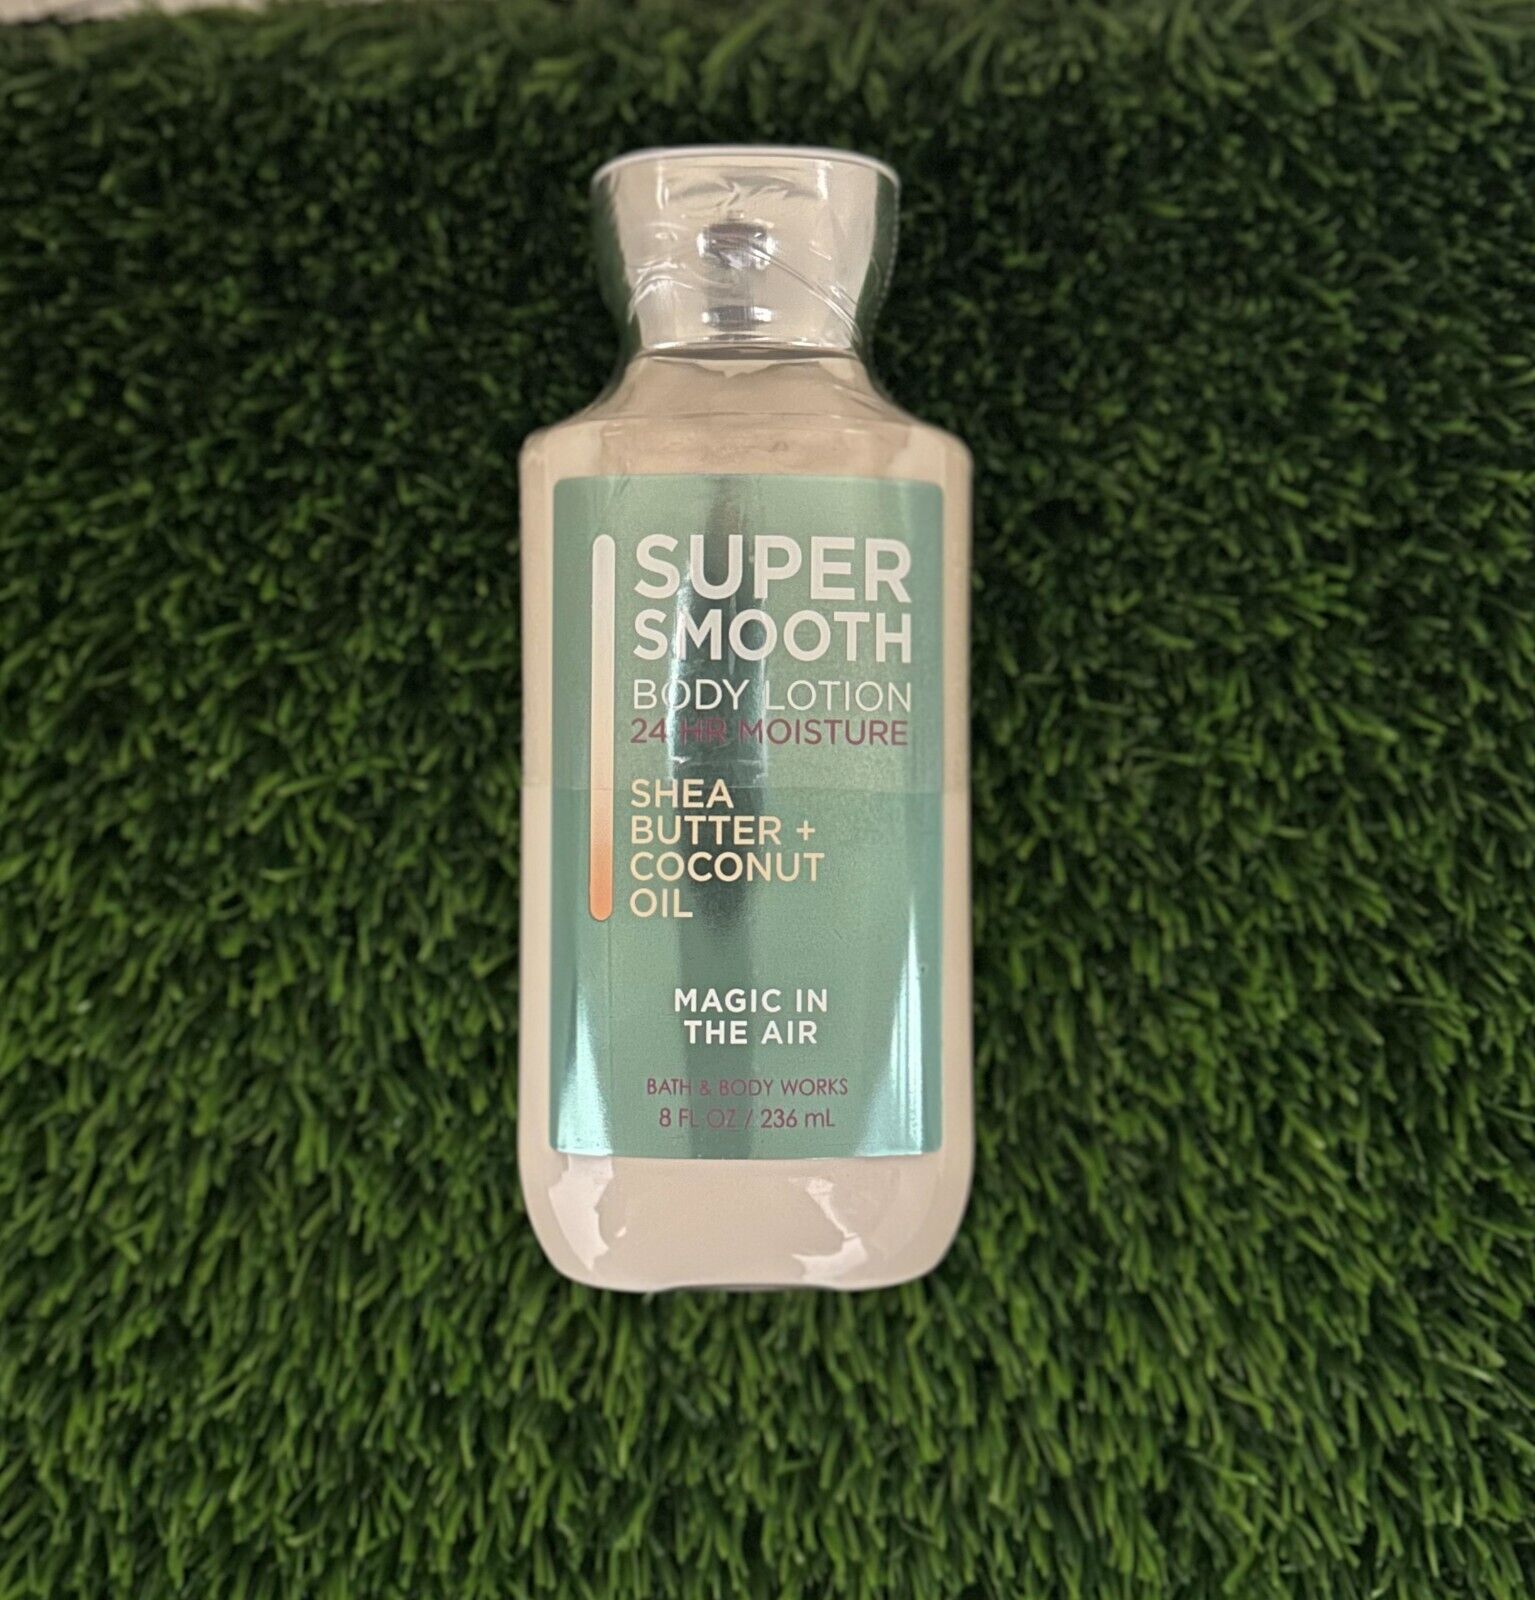 Bath & Body Works Hello Beautiful Super Smooth Shea Butter Body Lotion